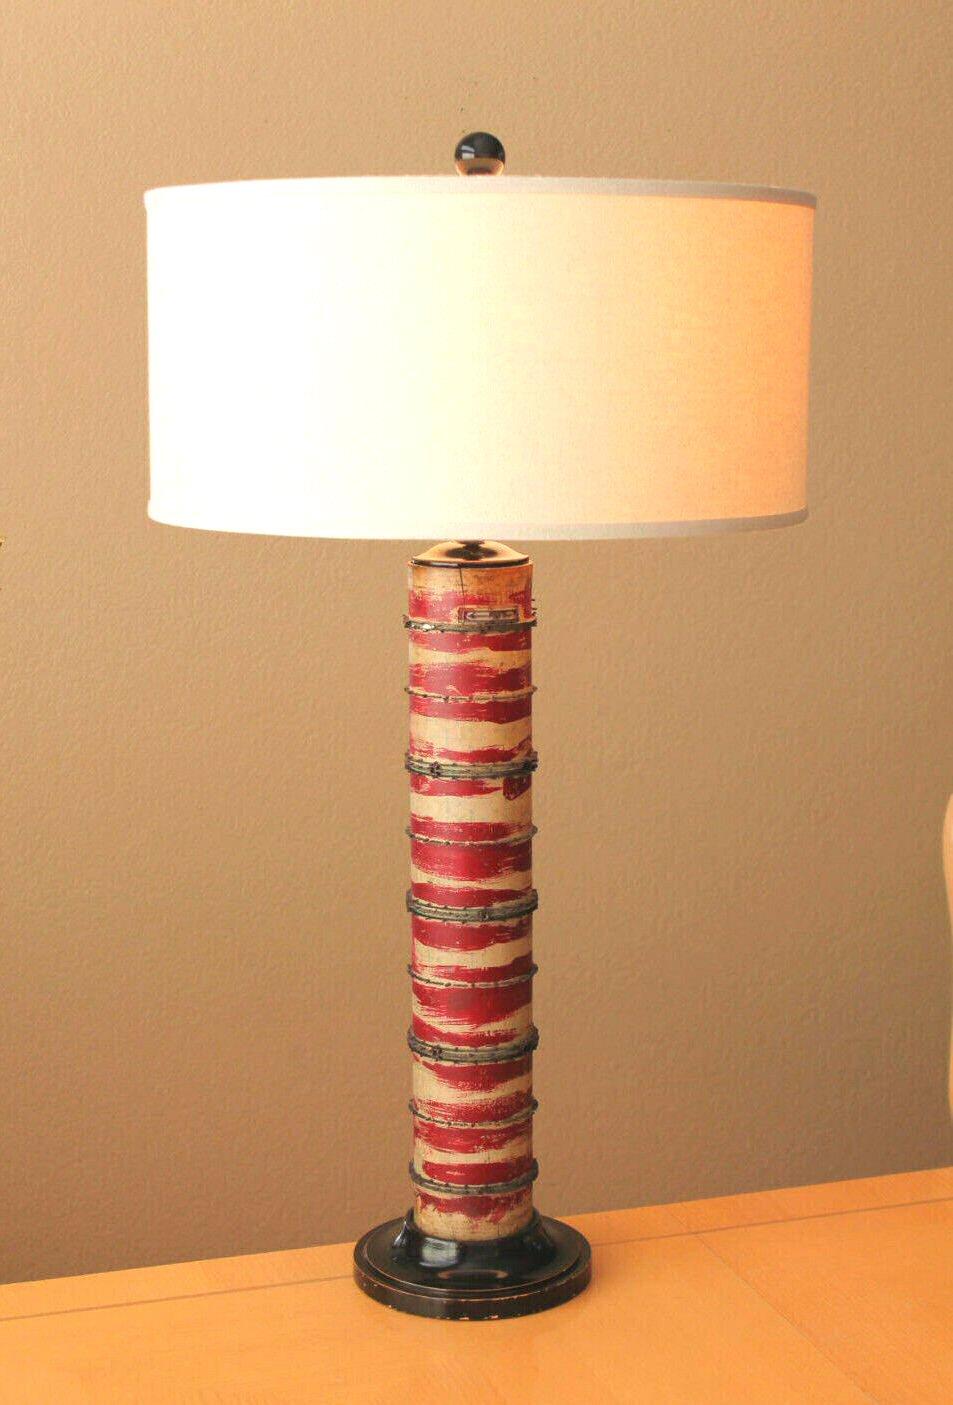 

MARVELOUS!

 
HOLLYWOOD REGENCY
FRENCH WALLPAPER ROLLER LAMP!

EXQUISITE!

 
DIMENSIONS: APPROX. 36